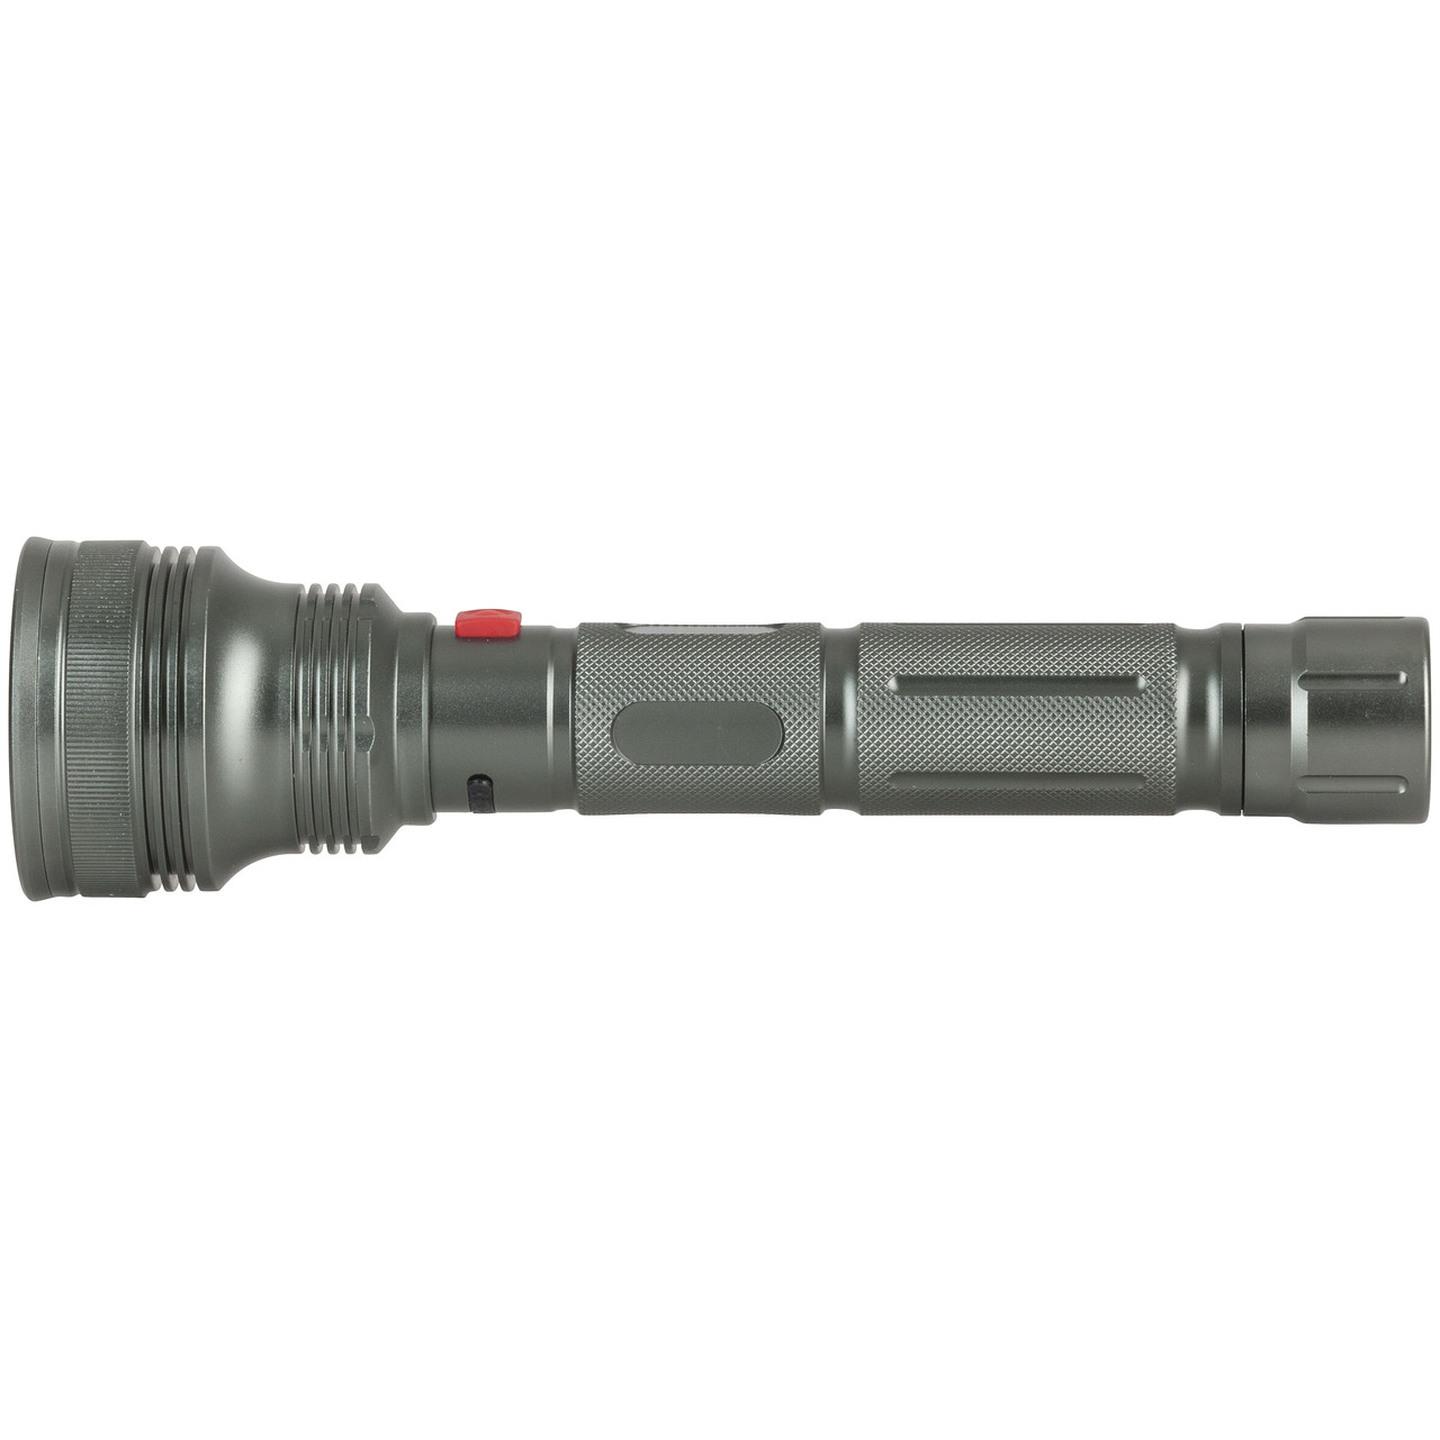 2500 Lumen rechargeable LED torch